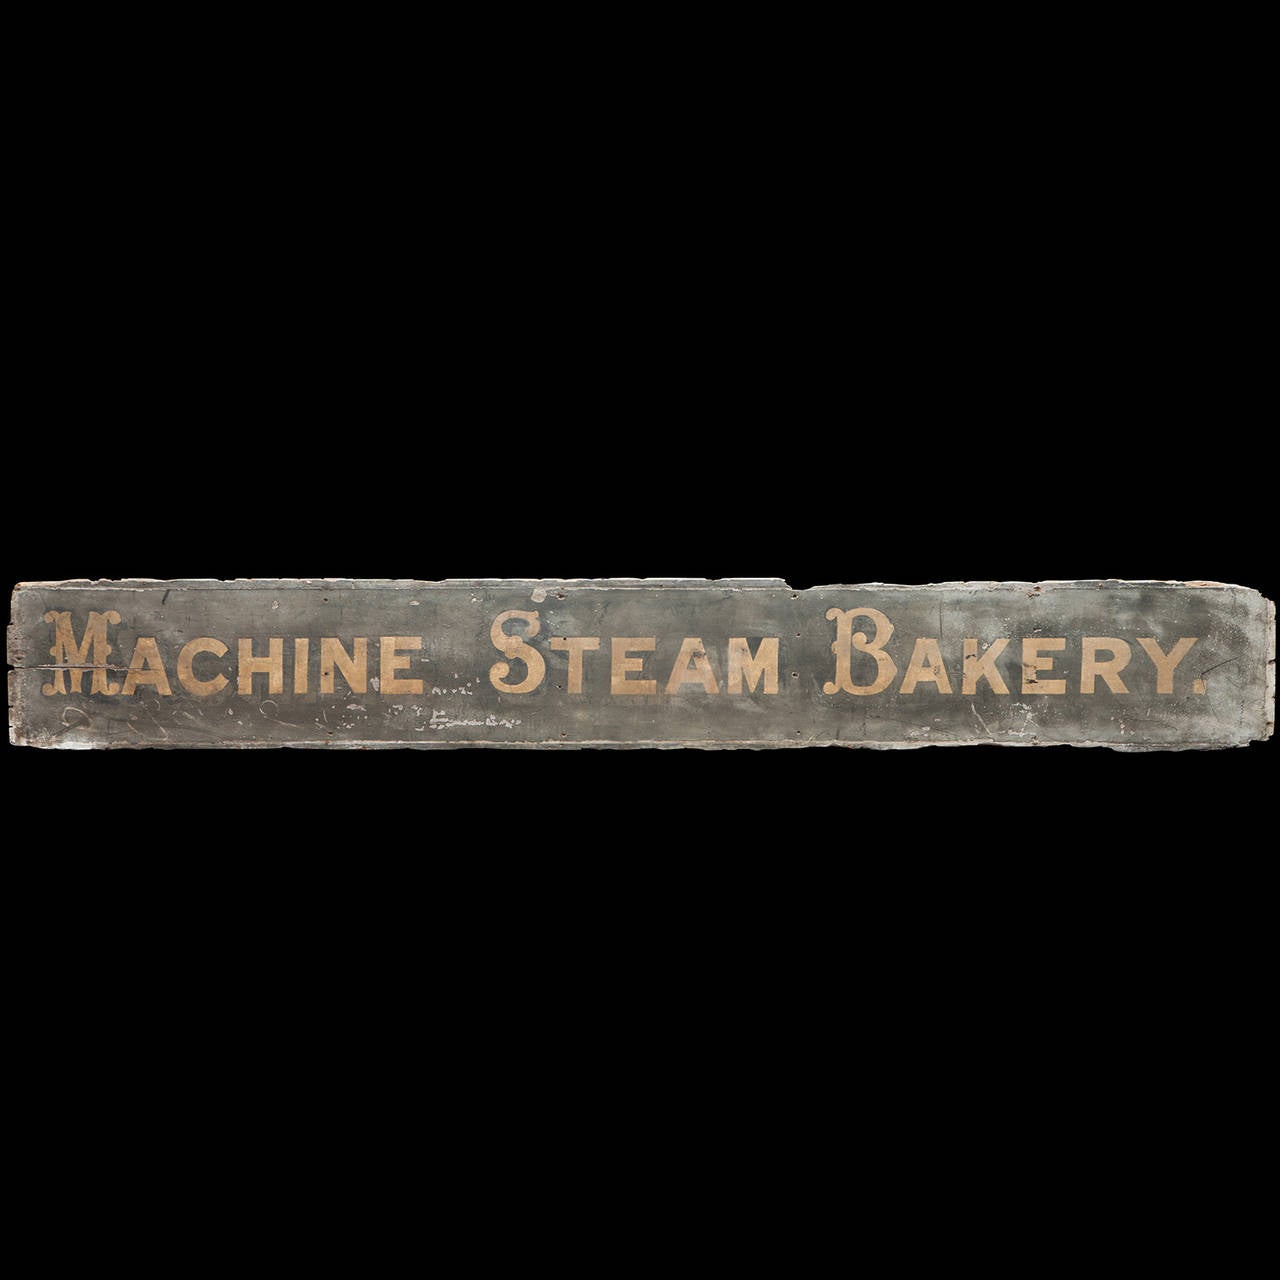 Gilded letters read: “Machine Steam Bakery”. Original from a bakery in Chipping Sodbury.